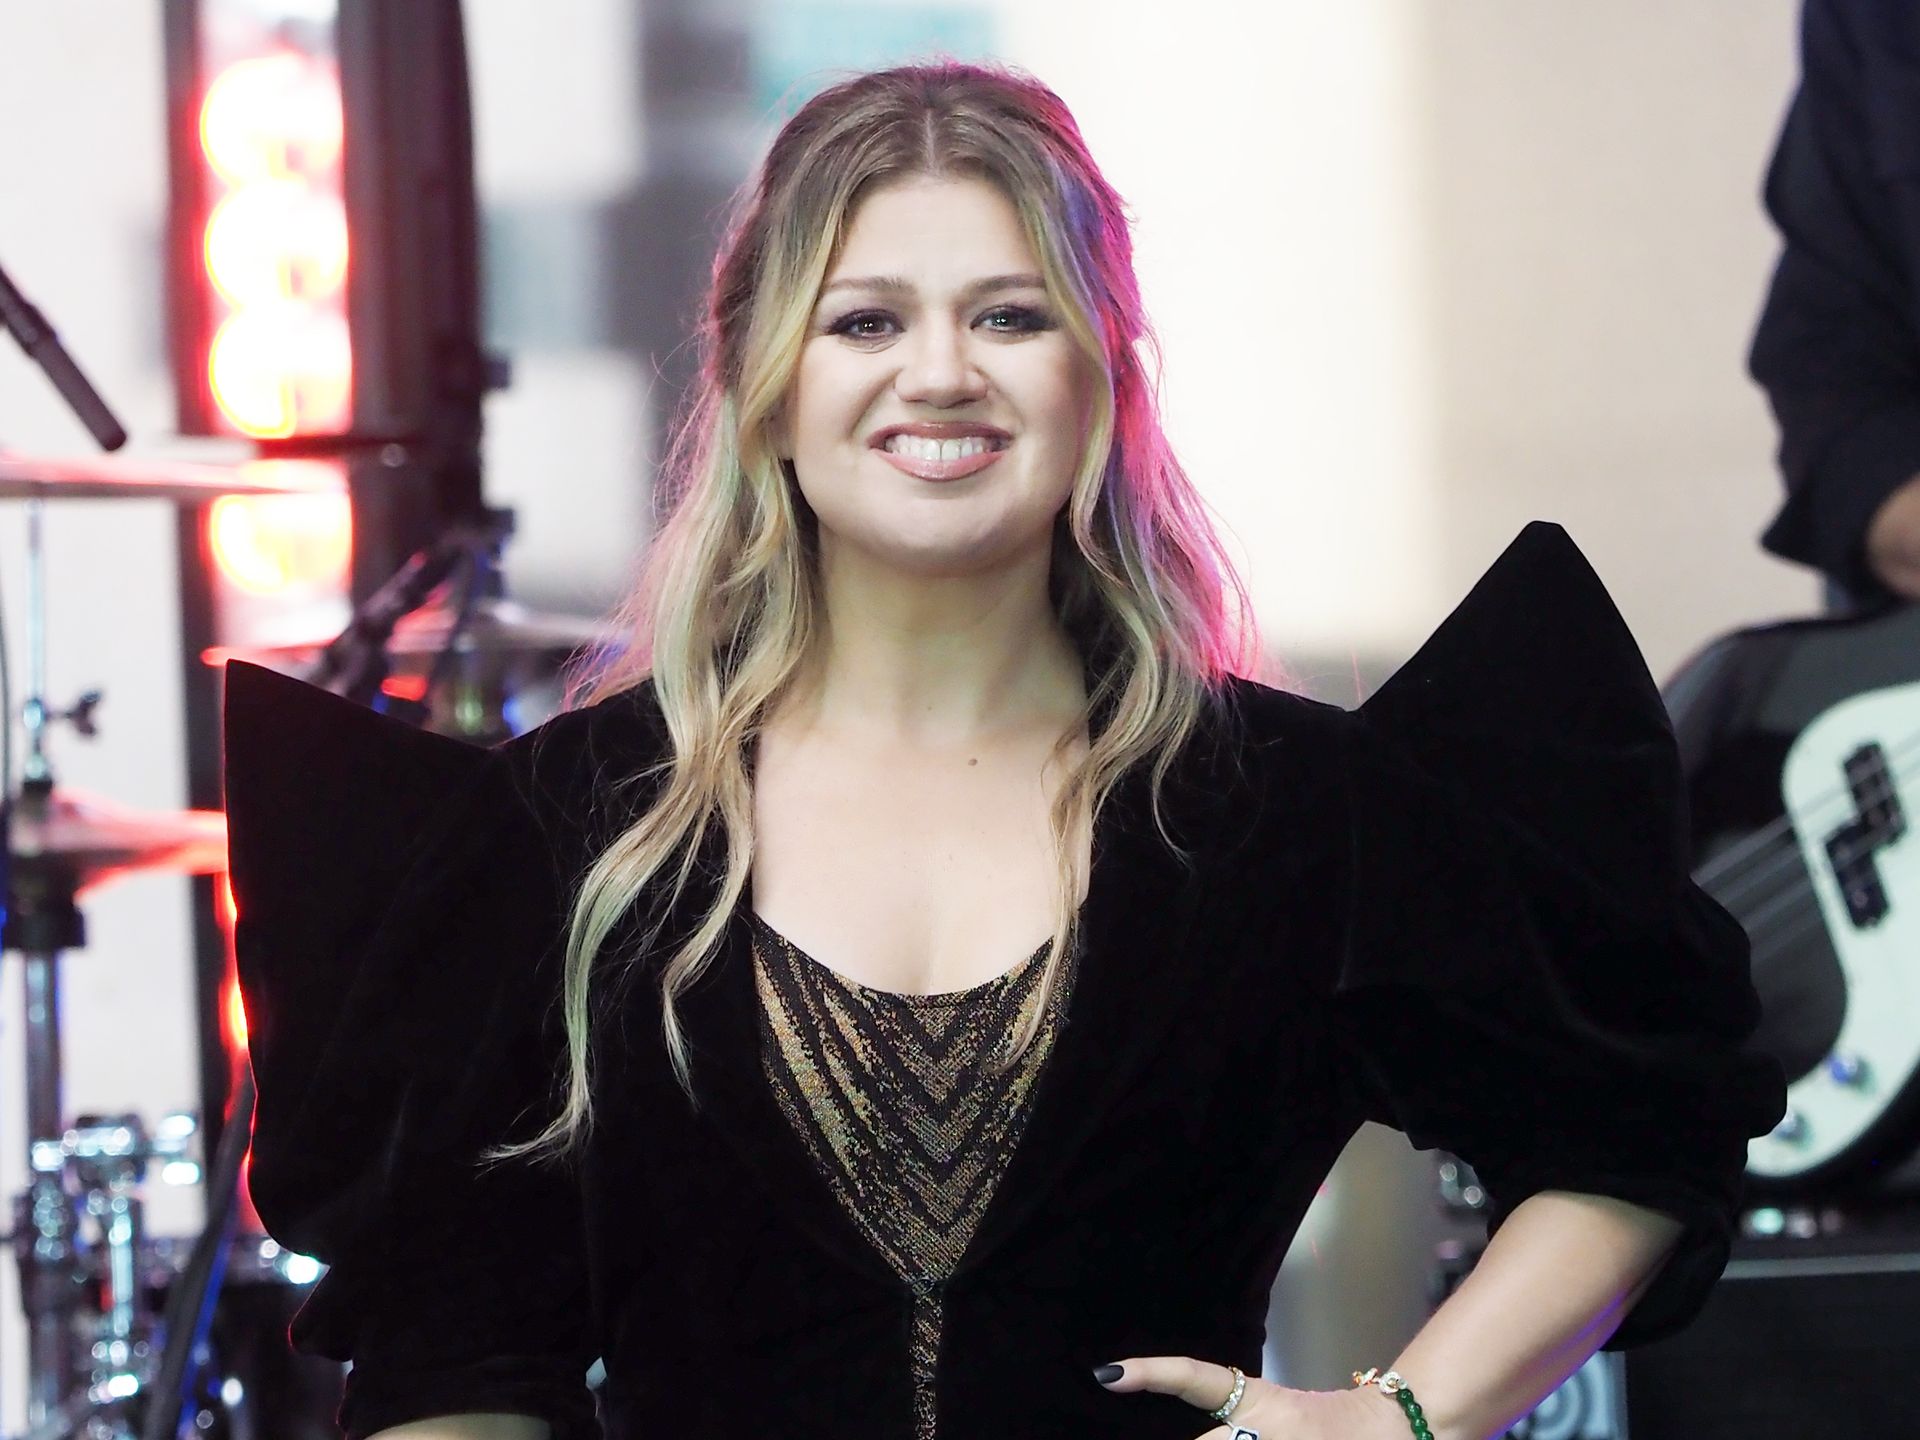 Get Kelly Clarkson's Red Jumpsuit Look for the Holidays